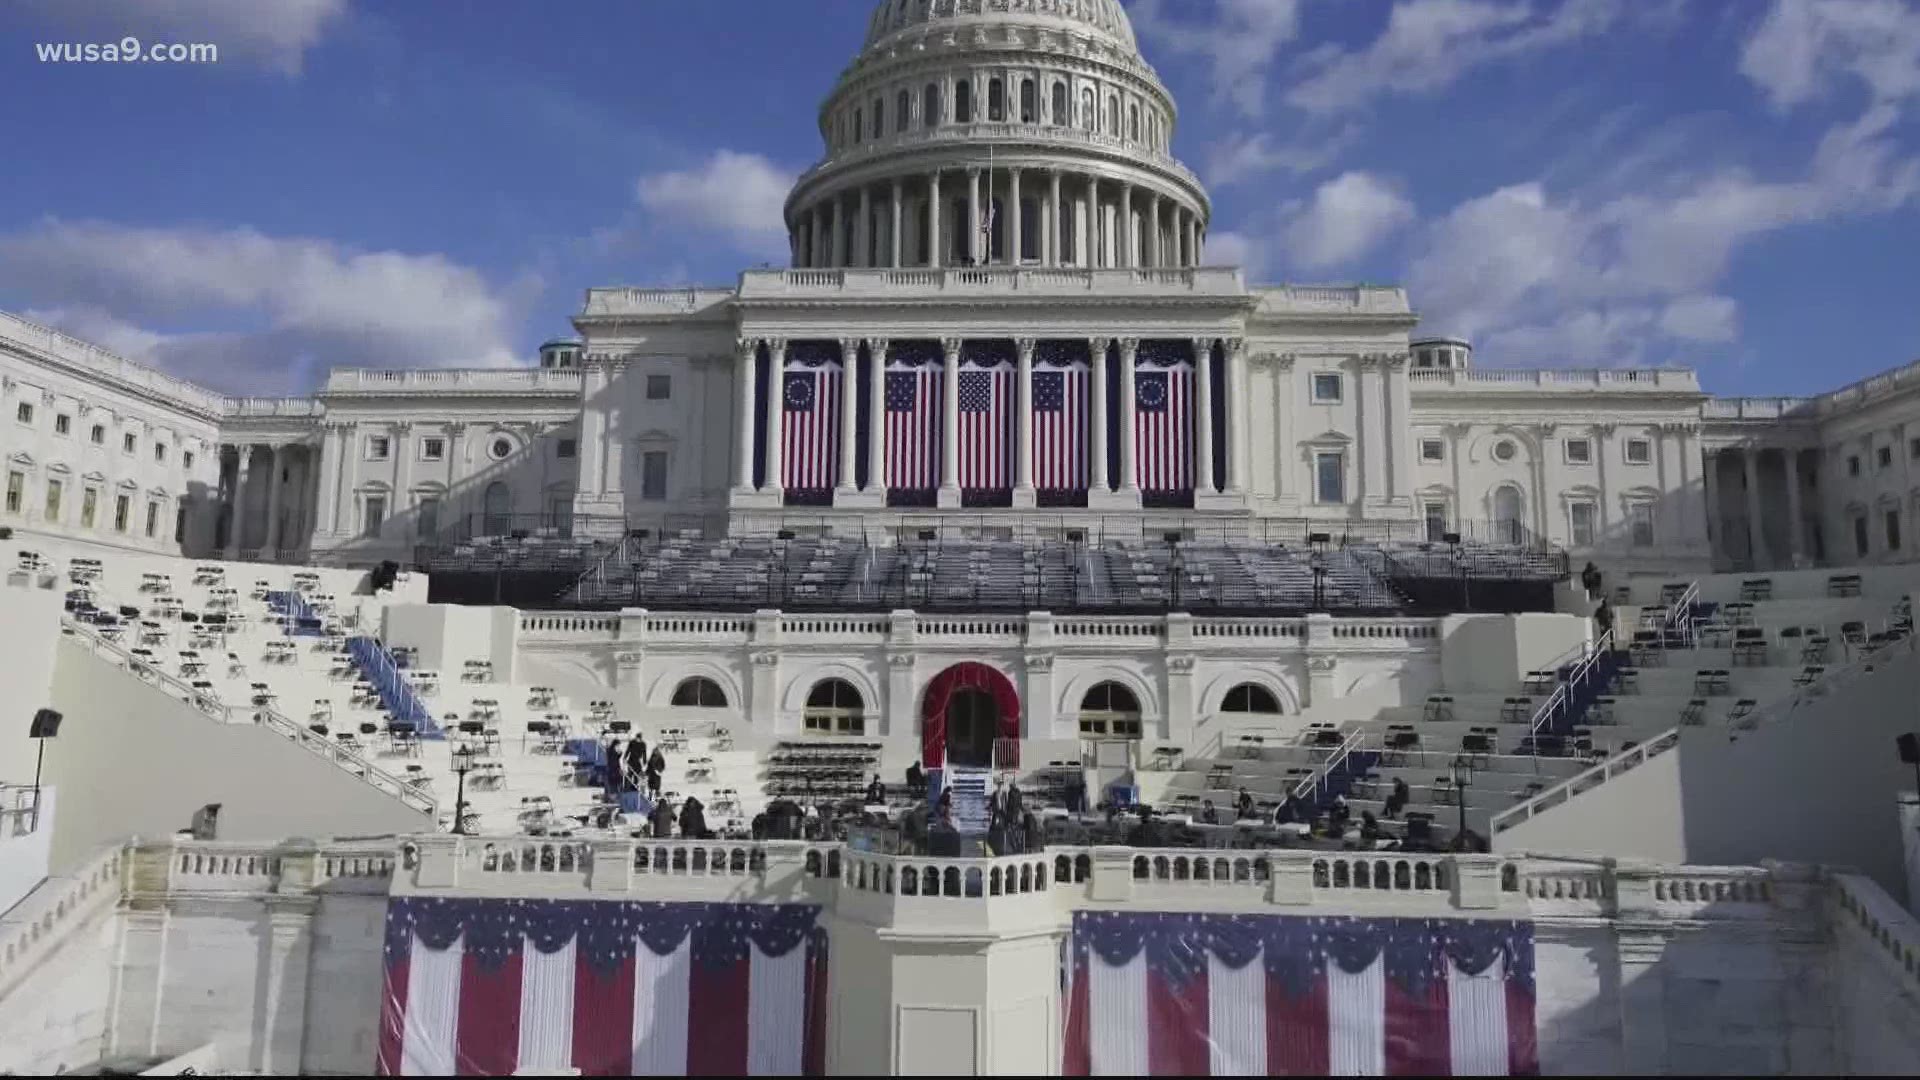 Here's what Inauguration Day 2021 will look like.